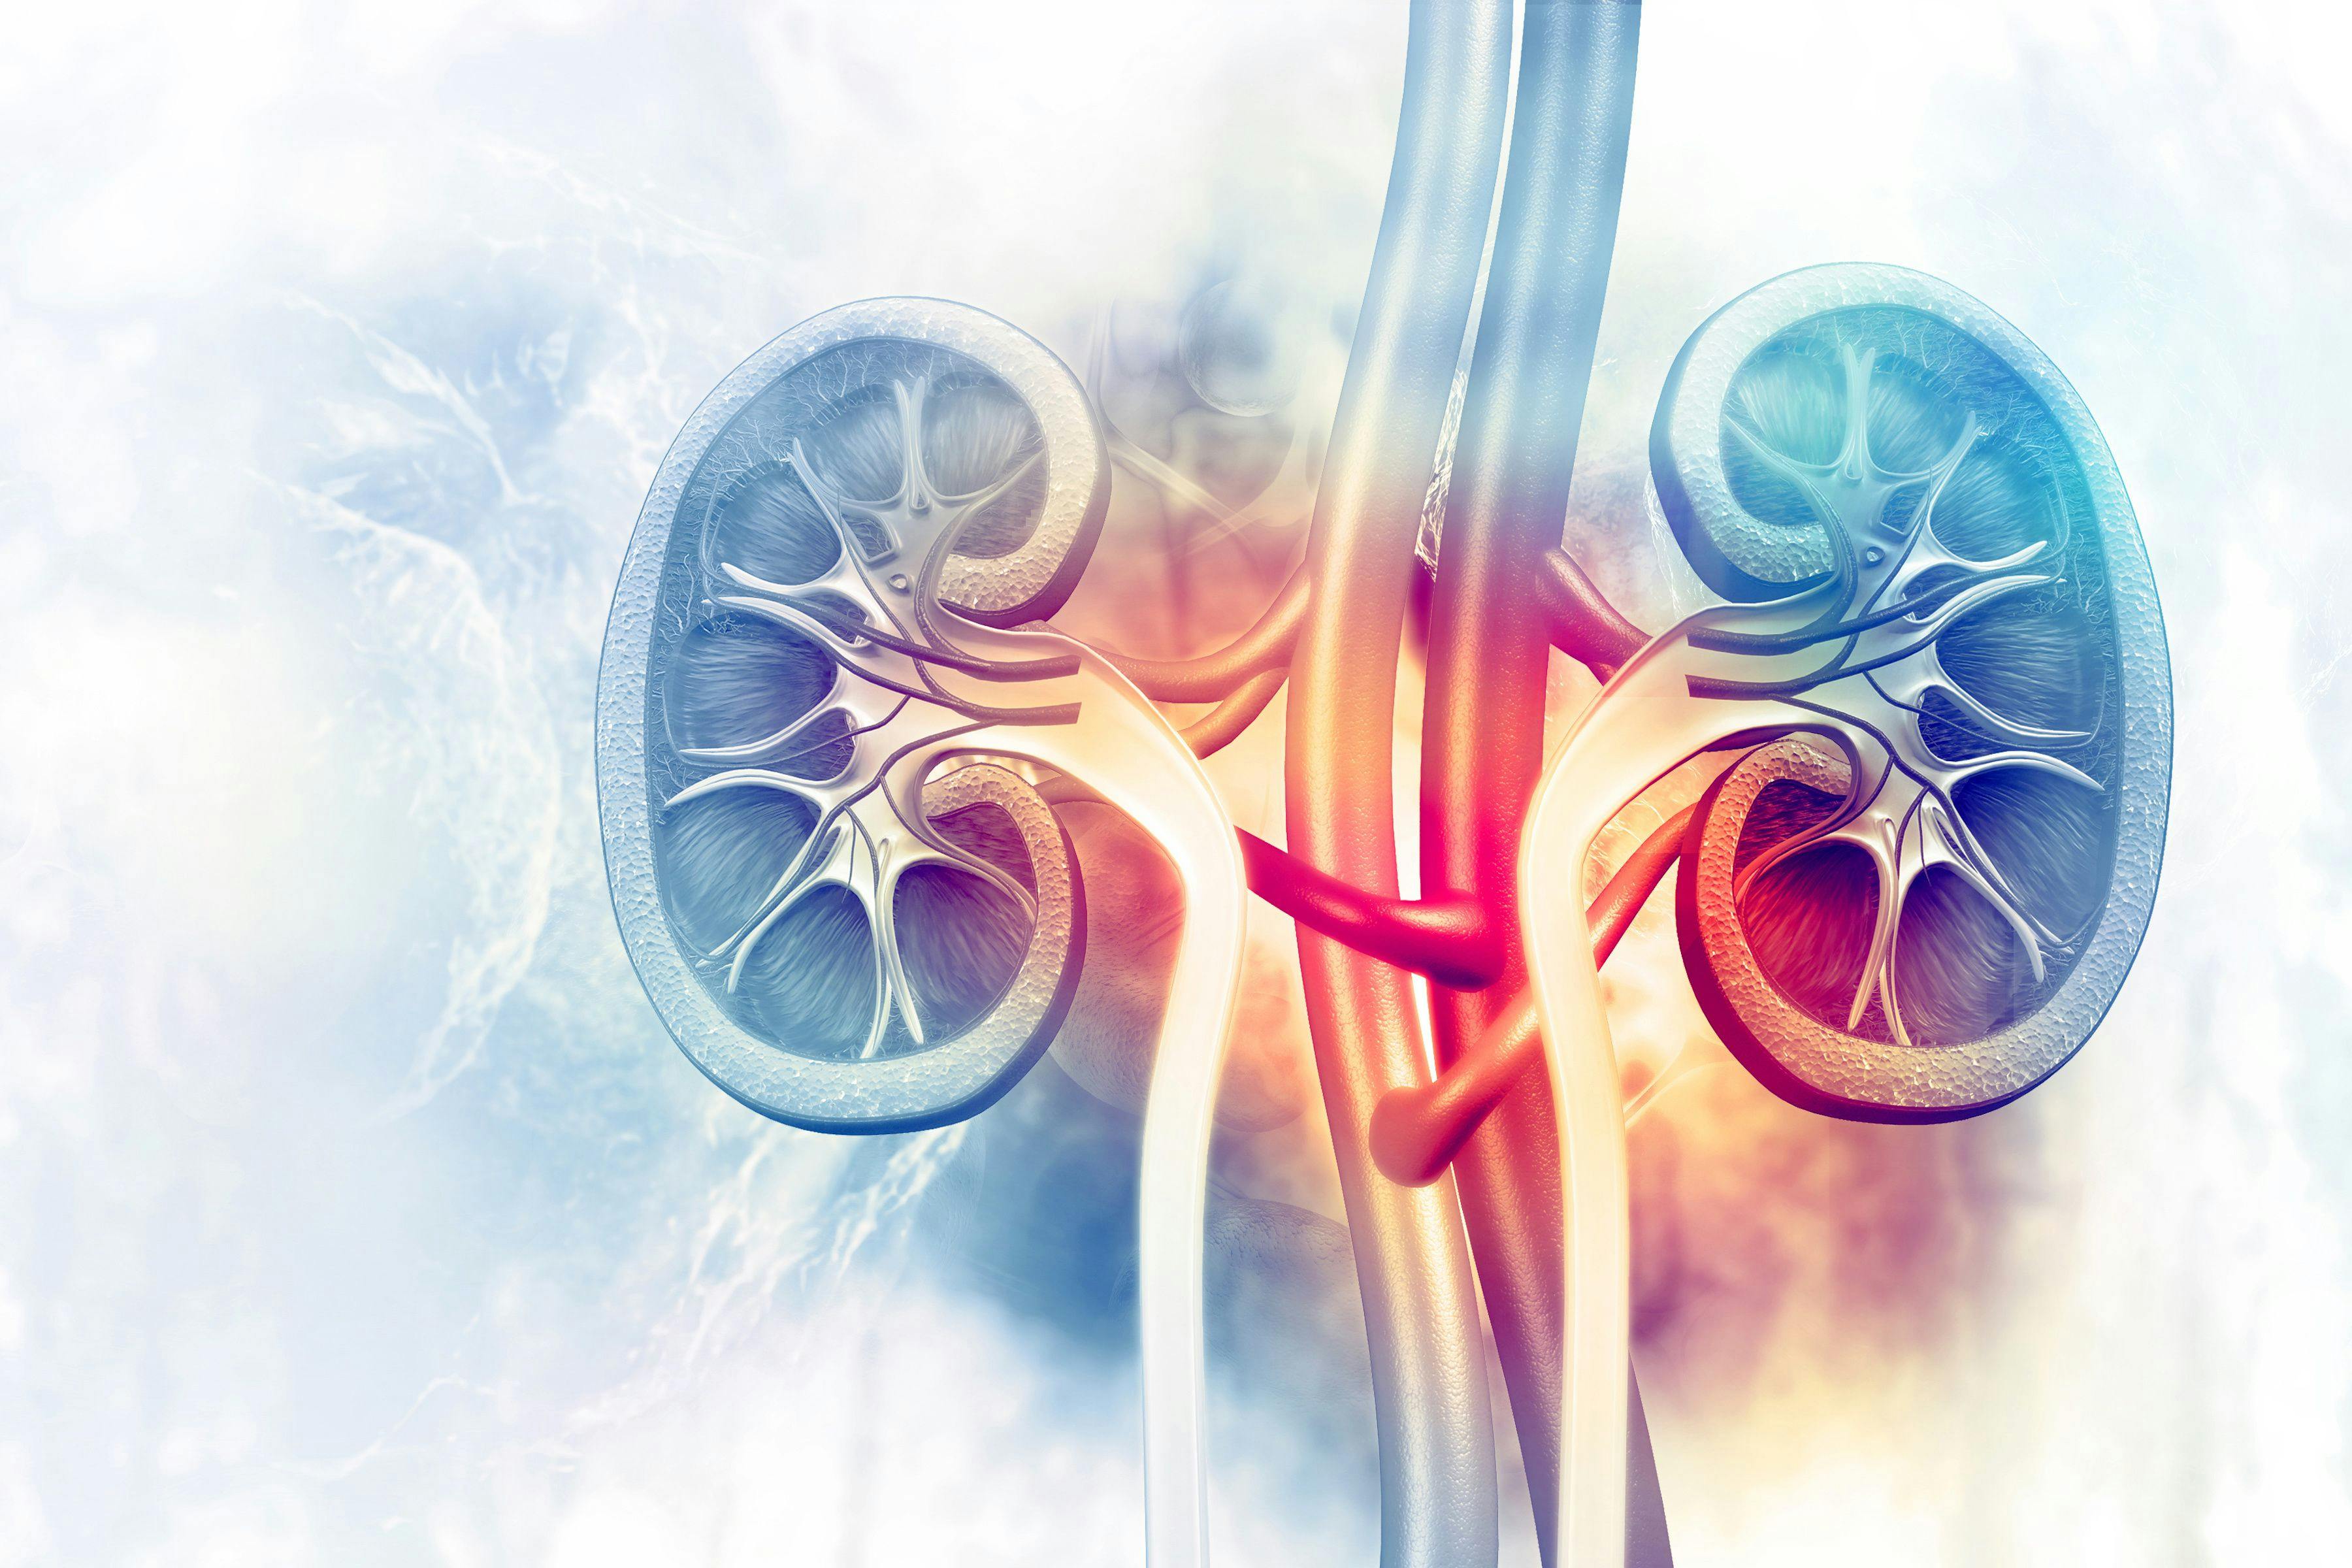 Human kidney cross section on scientific background | Image Credit: © Crystal light - stock.adobe.com.